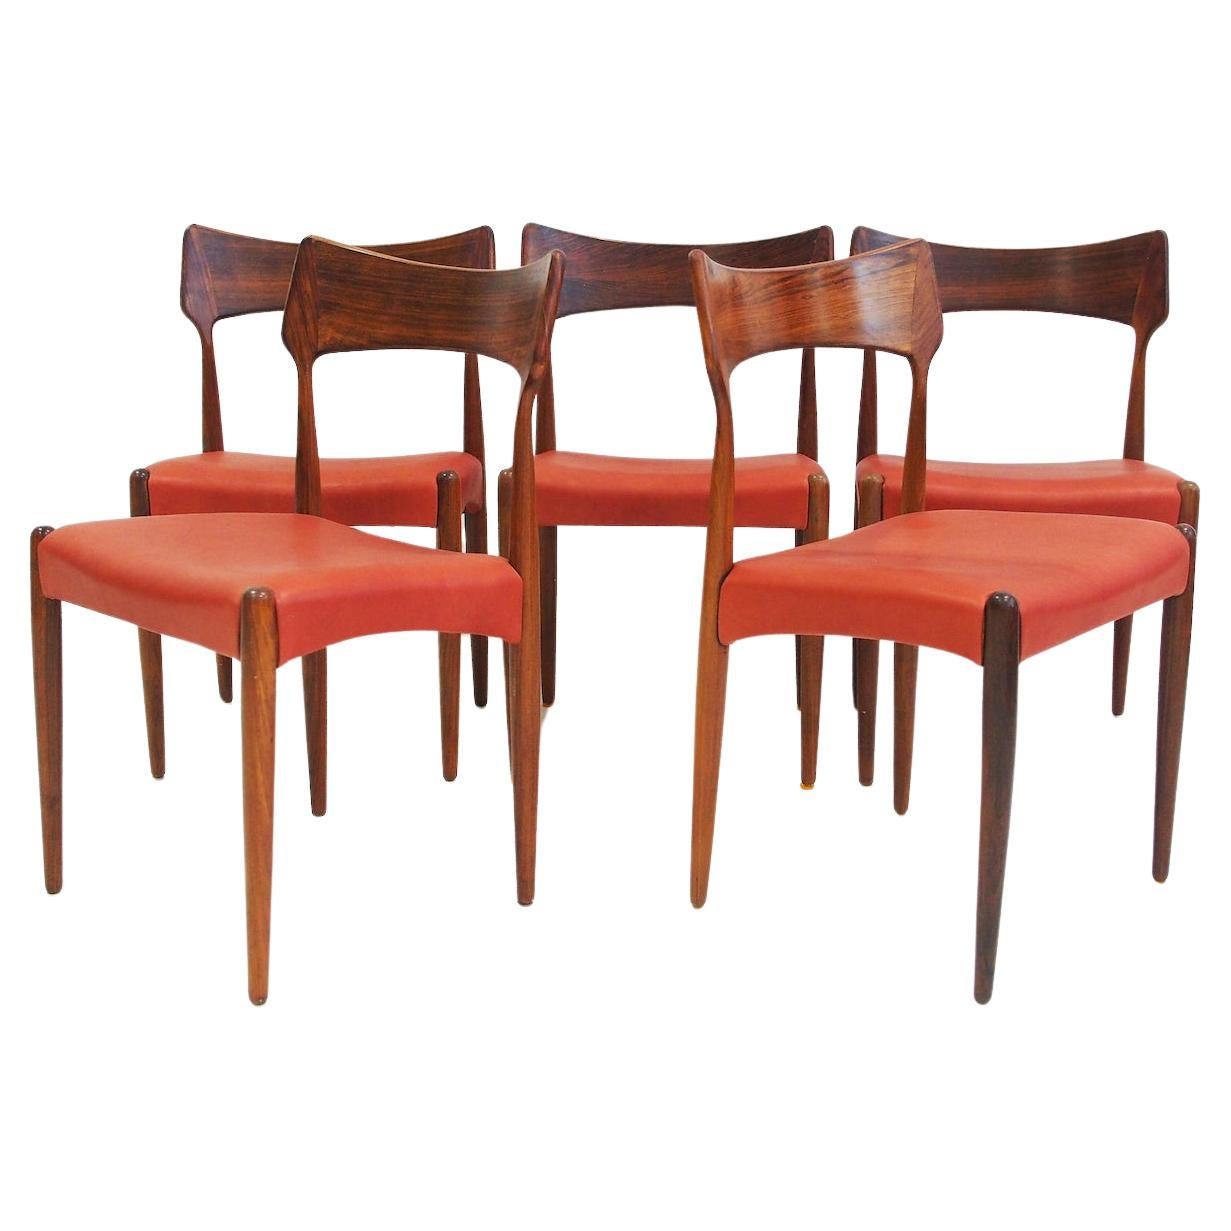 Five Wood and Leather Dining Chairs by Bernhard Pedersen & Son For Sale